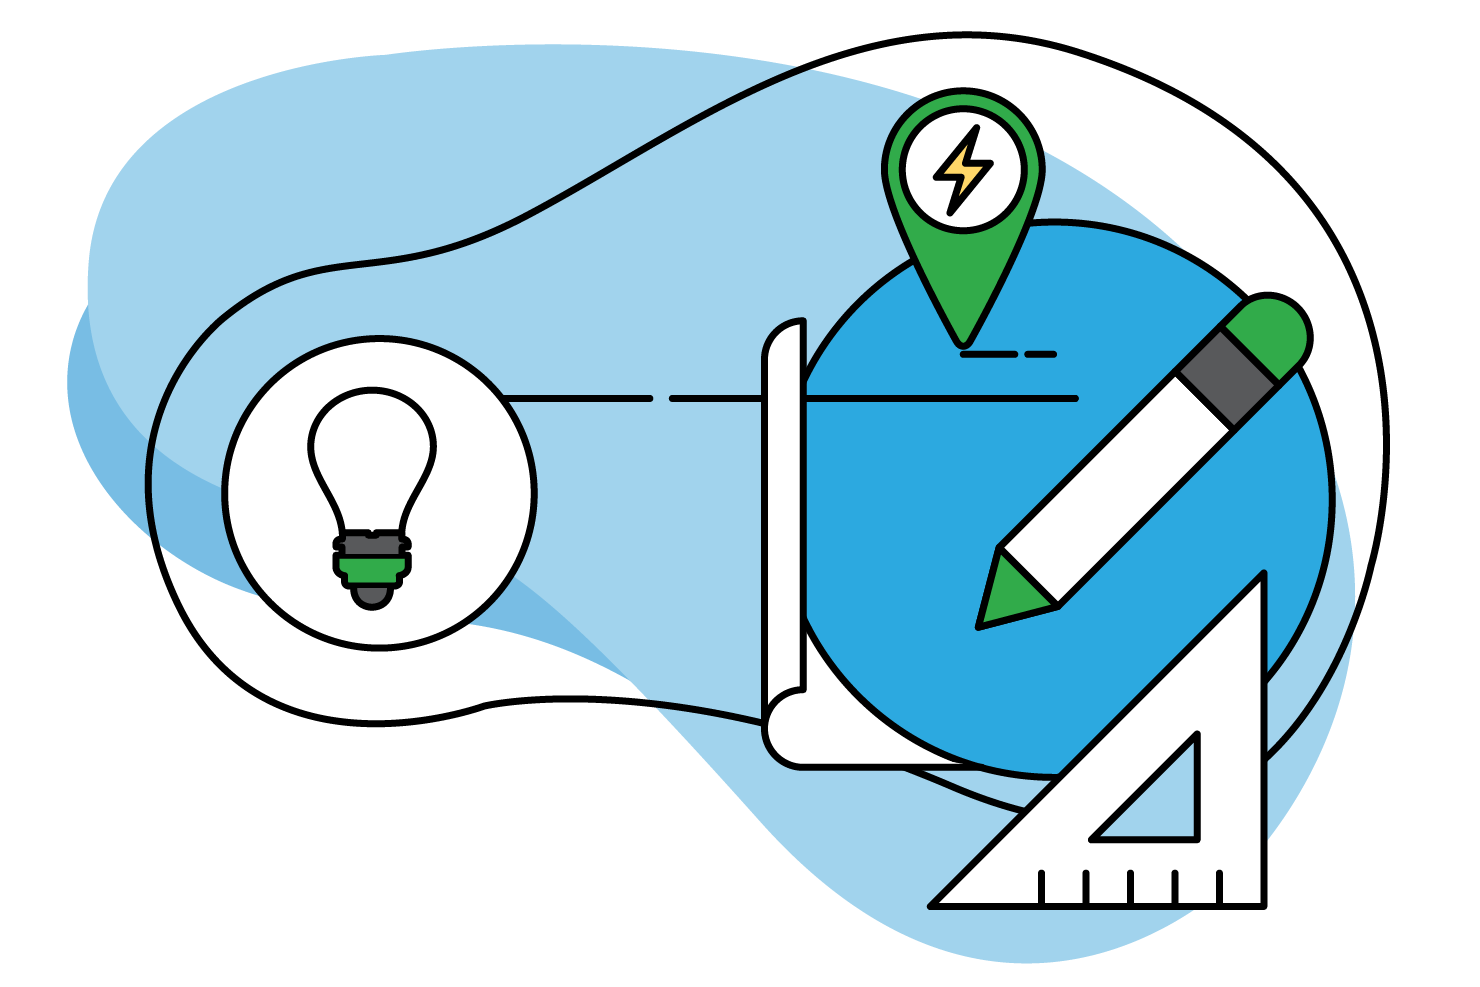 Stylized graphic of design and energy concepts with a lightbulb, pencil, ruler, and location pin with a lightning bolt.